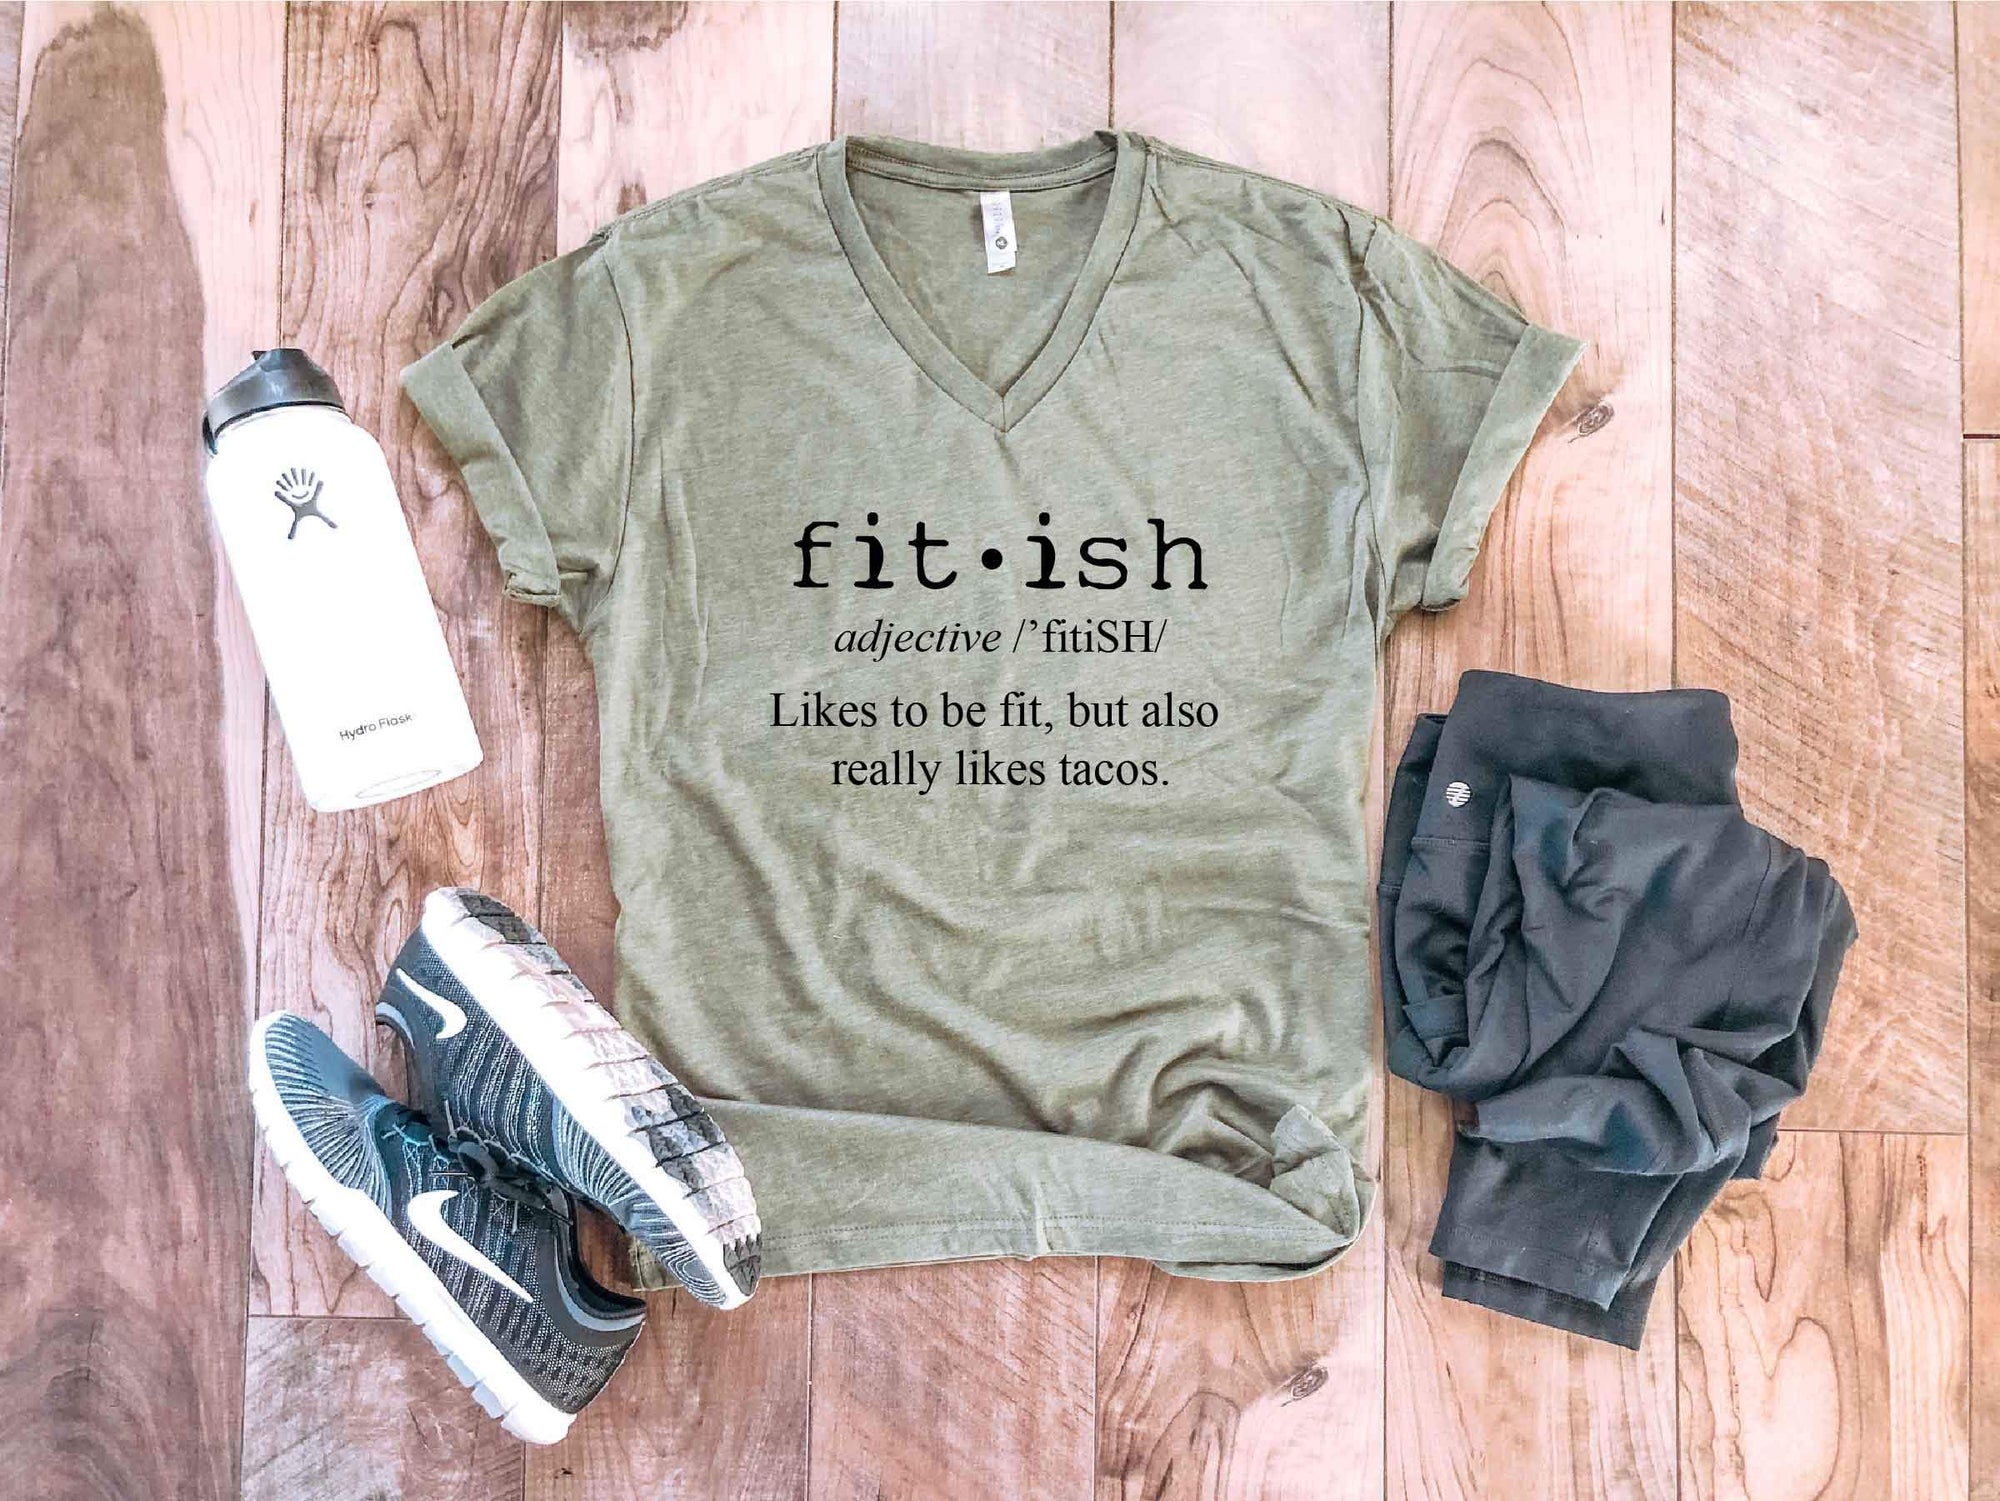 Fit-ish tee Fitness tee Next Level 6240 military green 